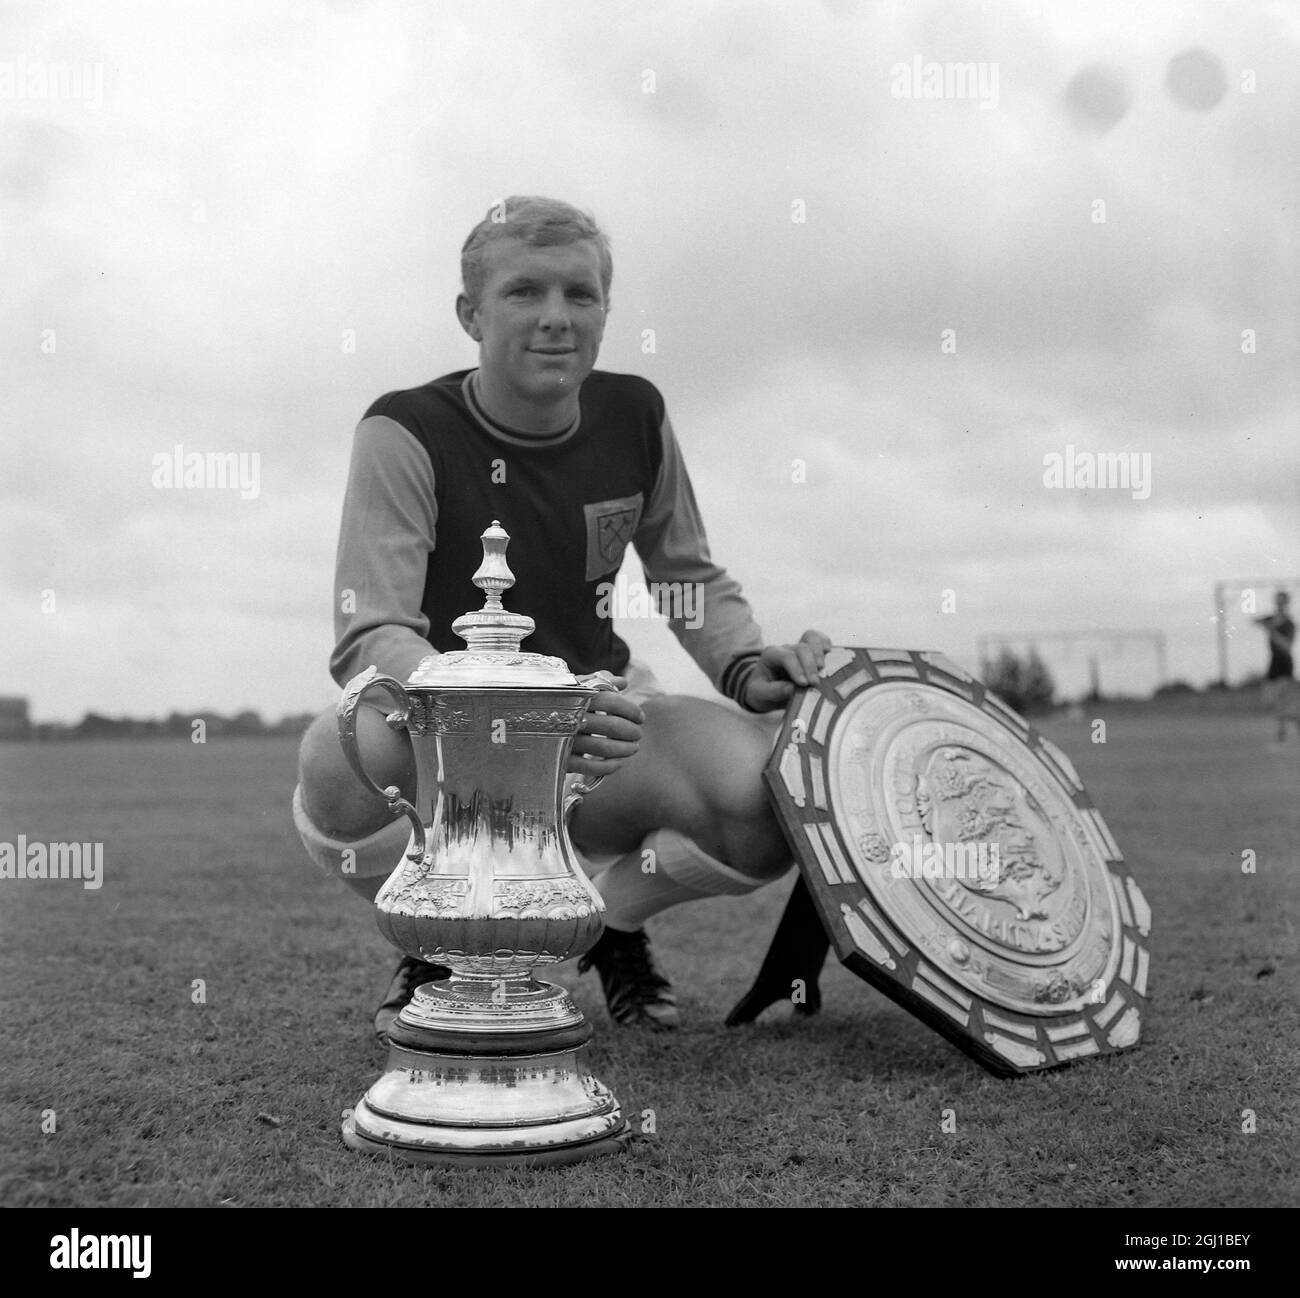 FOOTBALL WEST HAMS BOBBY MOORE POSIERT MIT FA CUP & CHARITY SCHILD IN LONDON ; 18. AUGUST 1964 Stockfoto